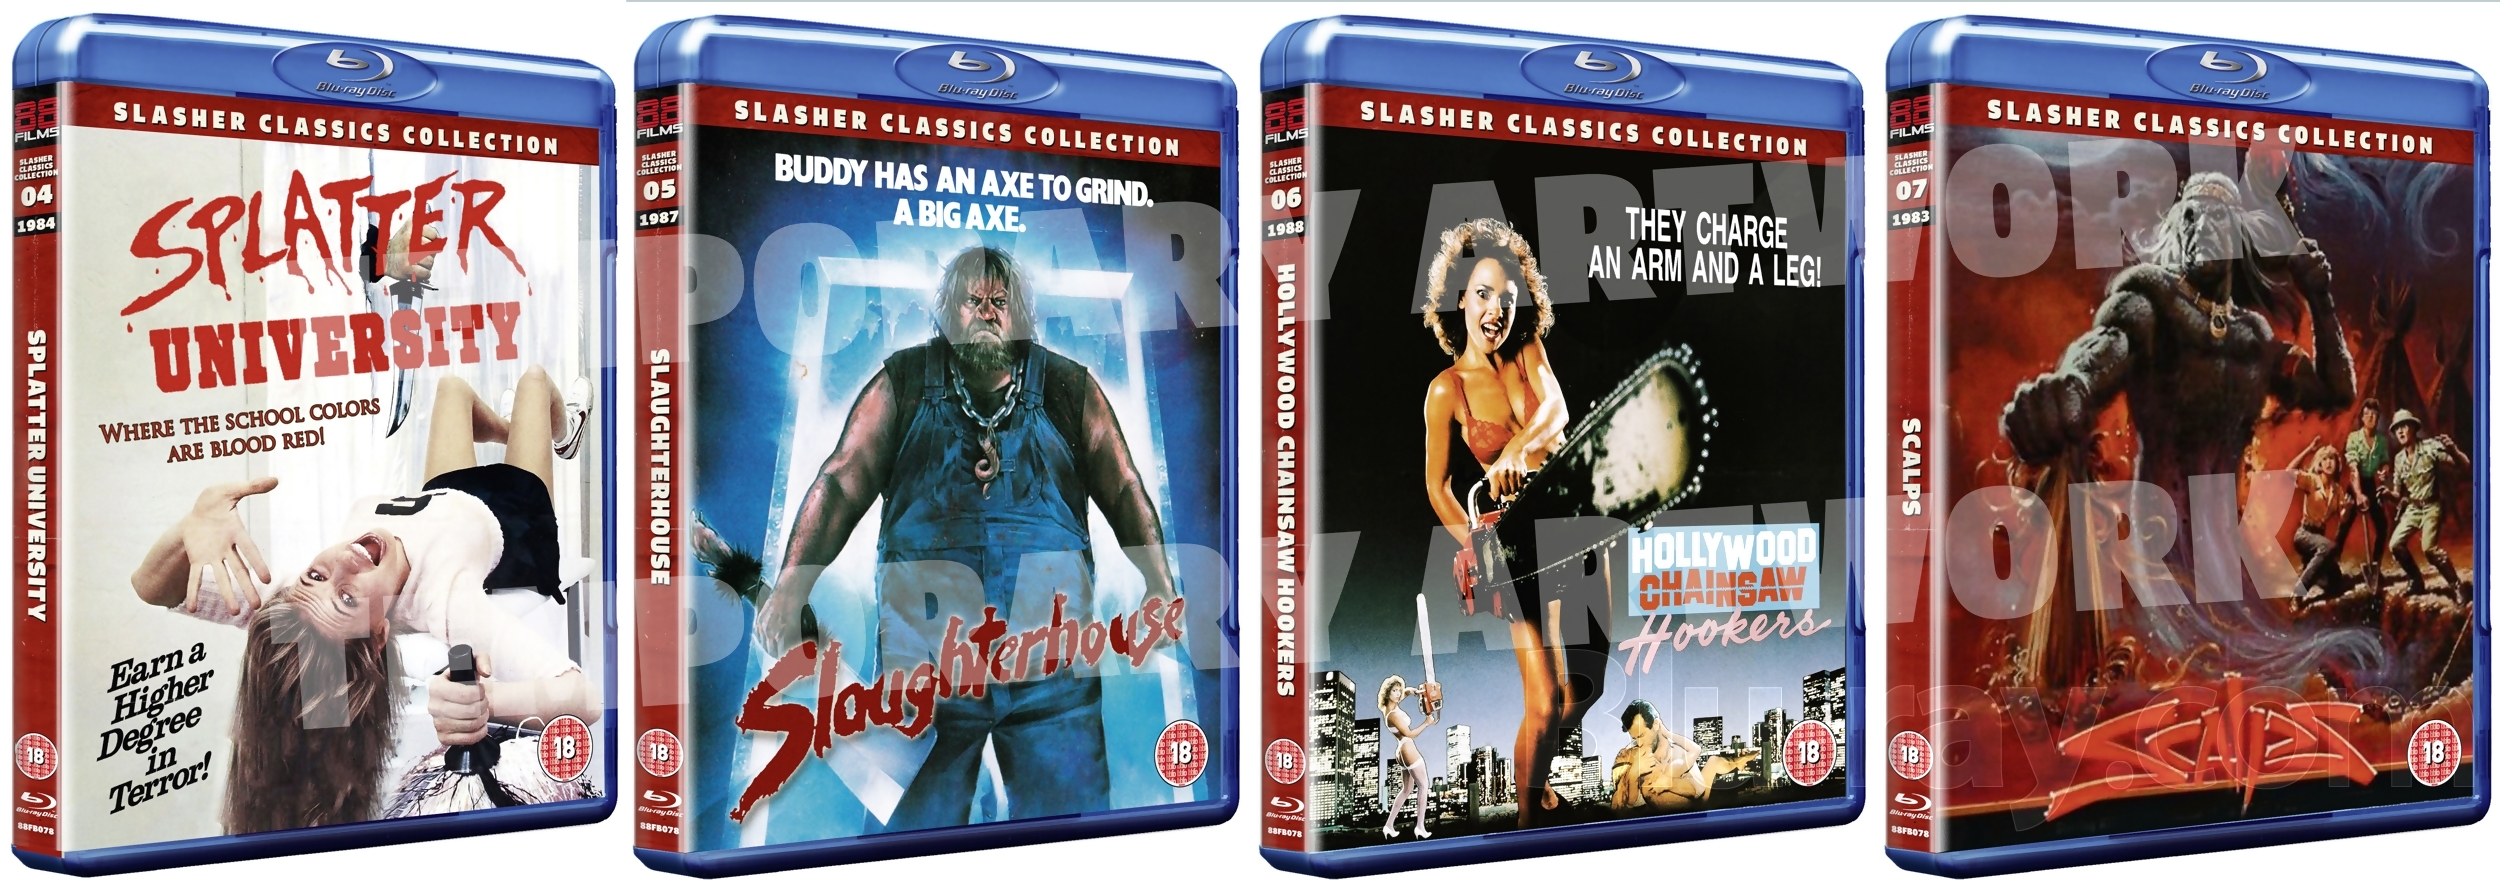 88 Films Bluray Releases